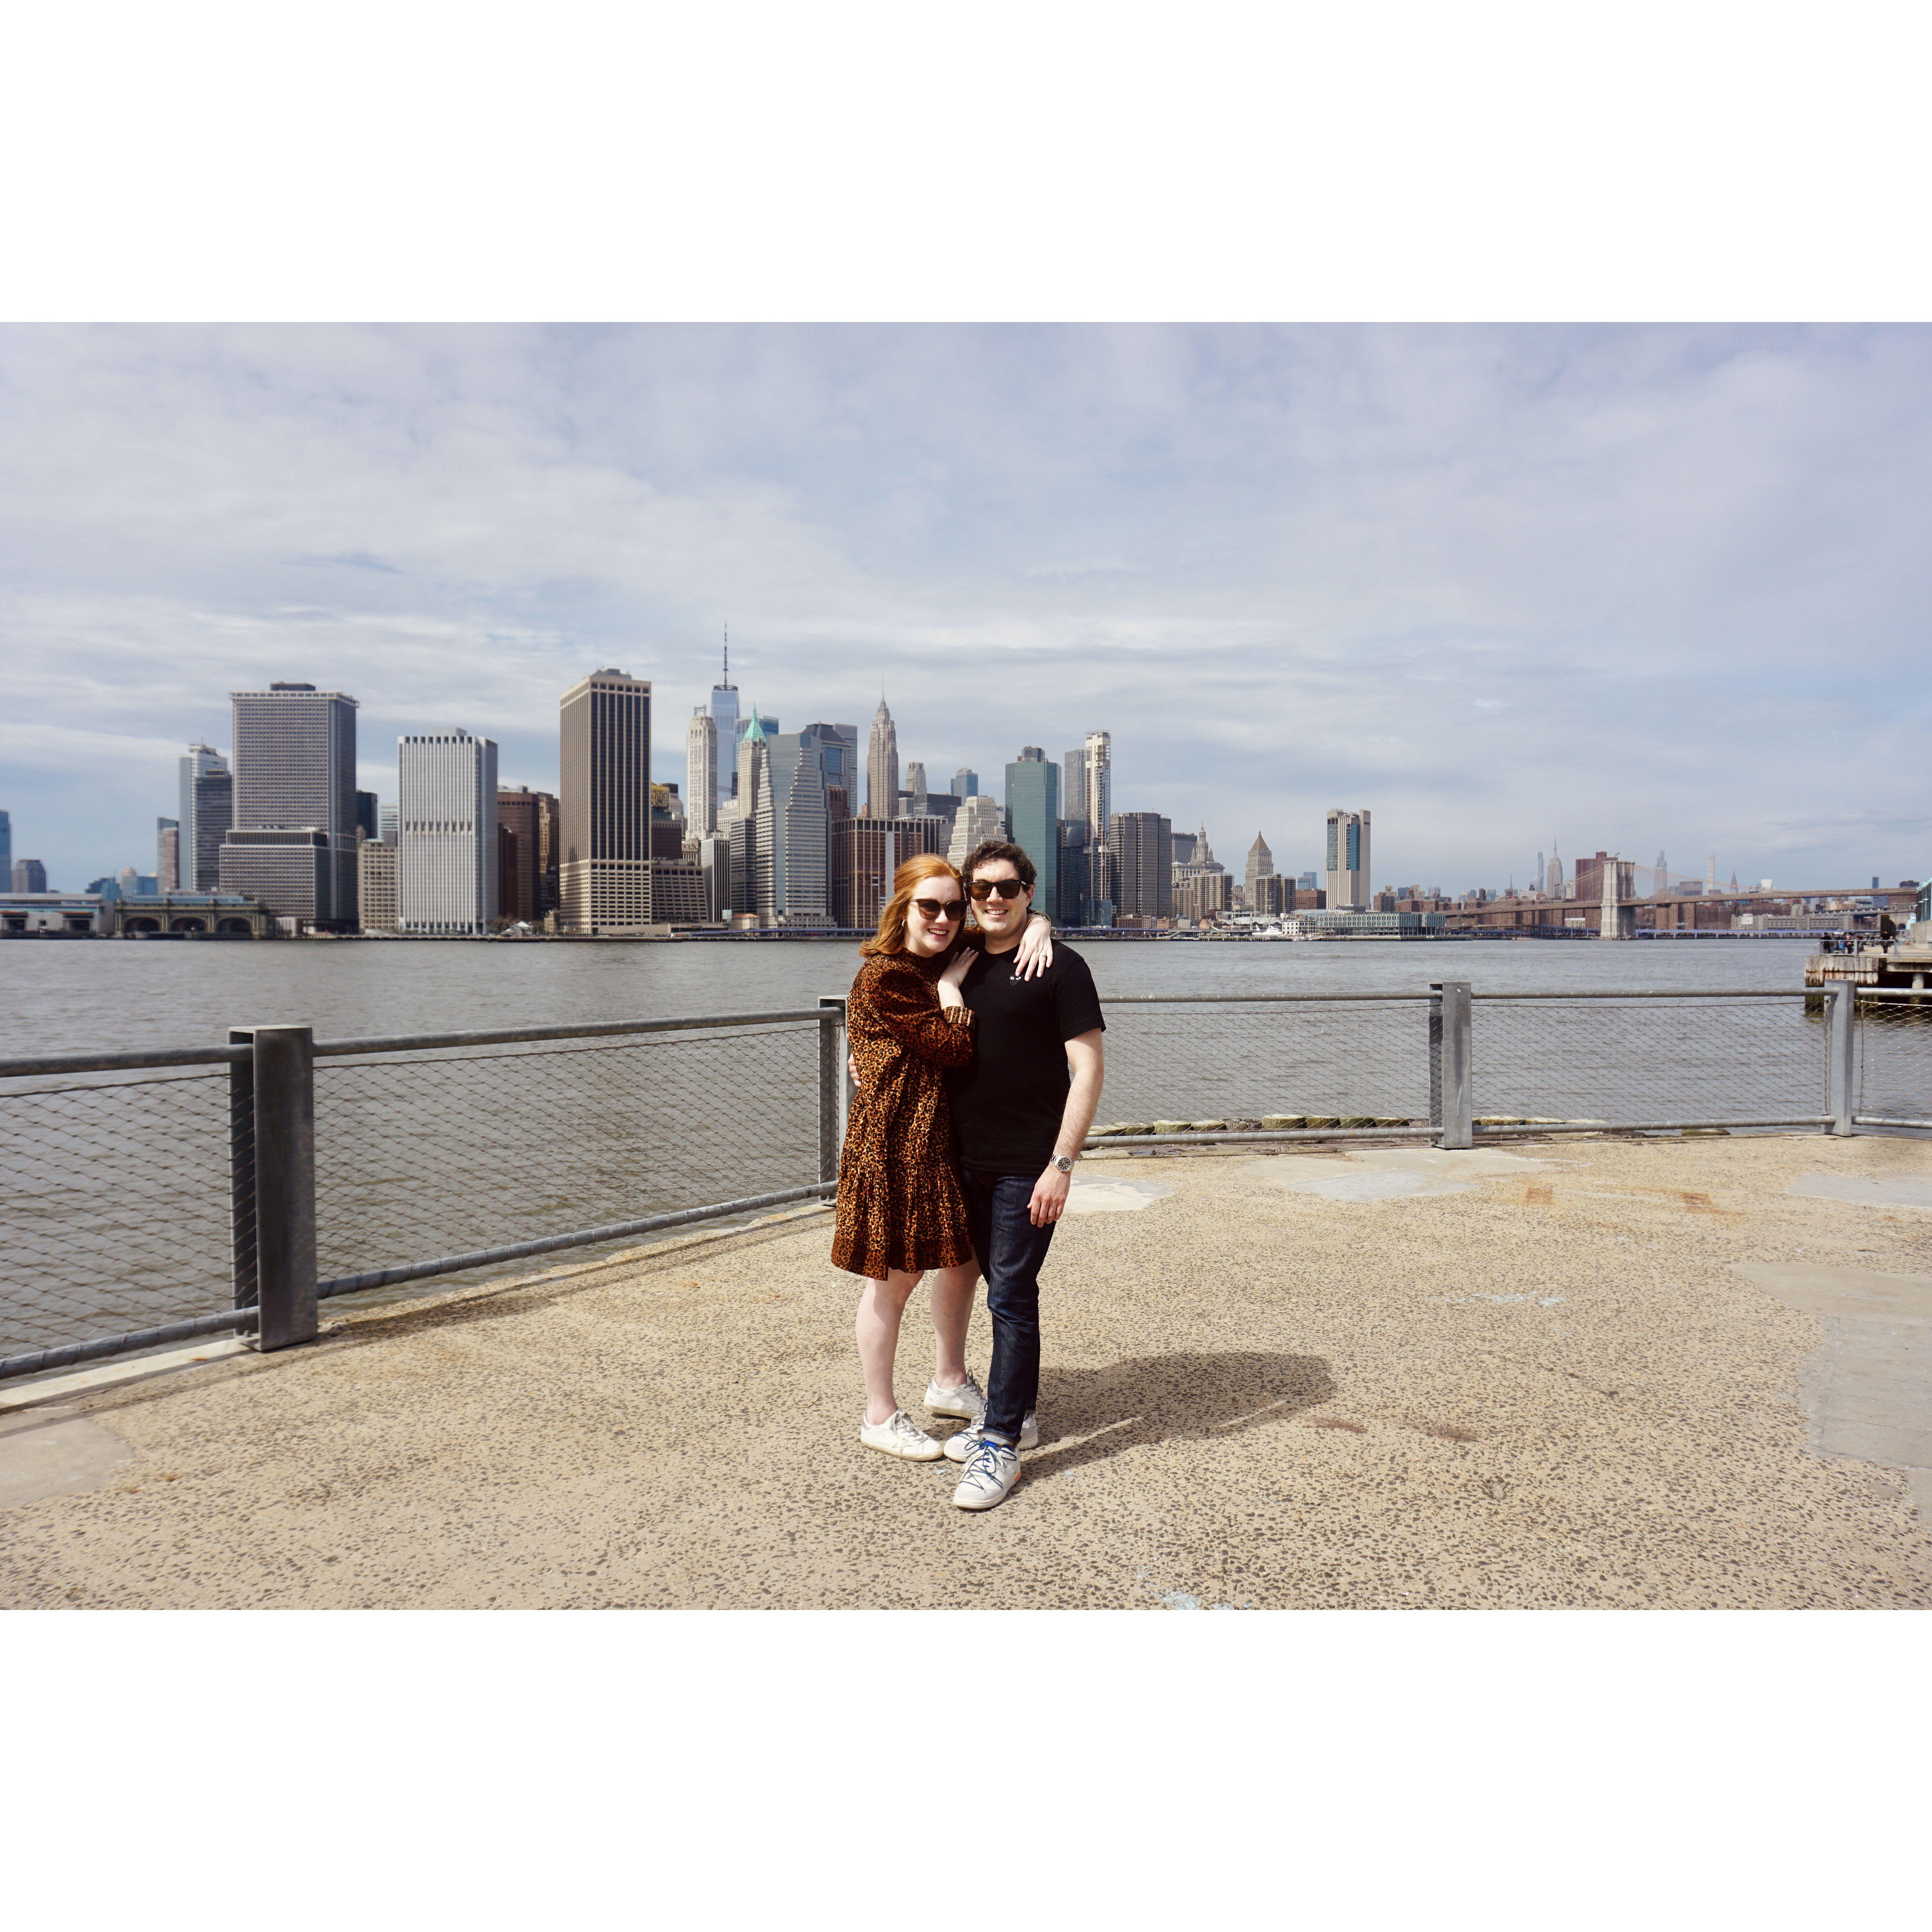 Tyler proposes at the Brooklyn waterfront